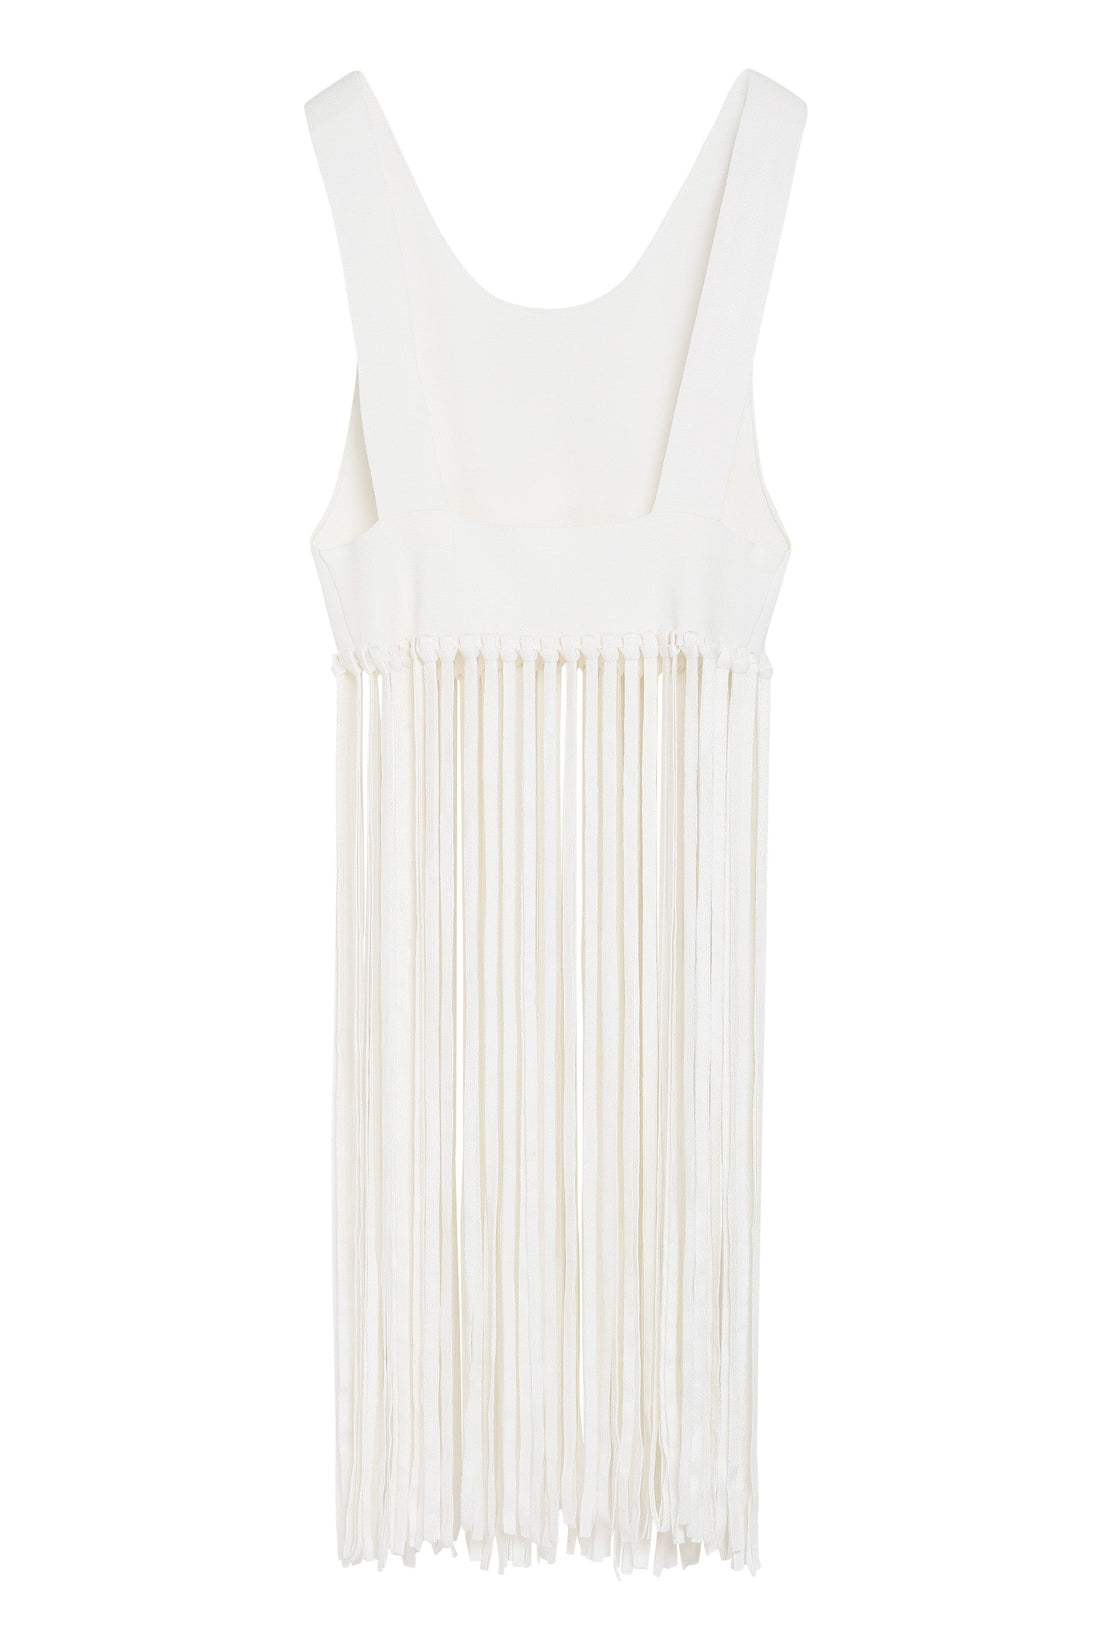 Philosophy di Lorenzo Serafini-OUTLET-SALE-Top with fringes-ARCHIVIST